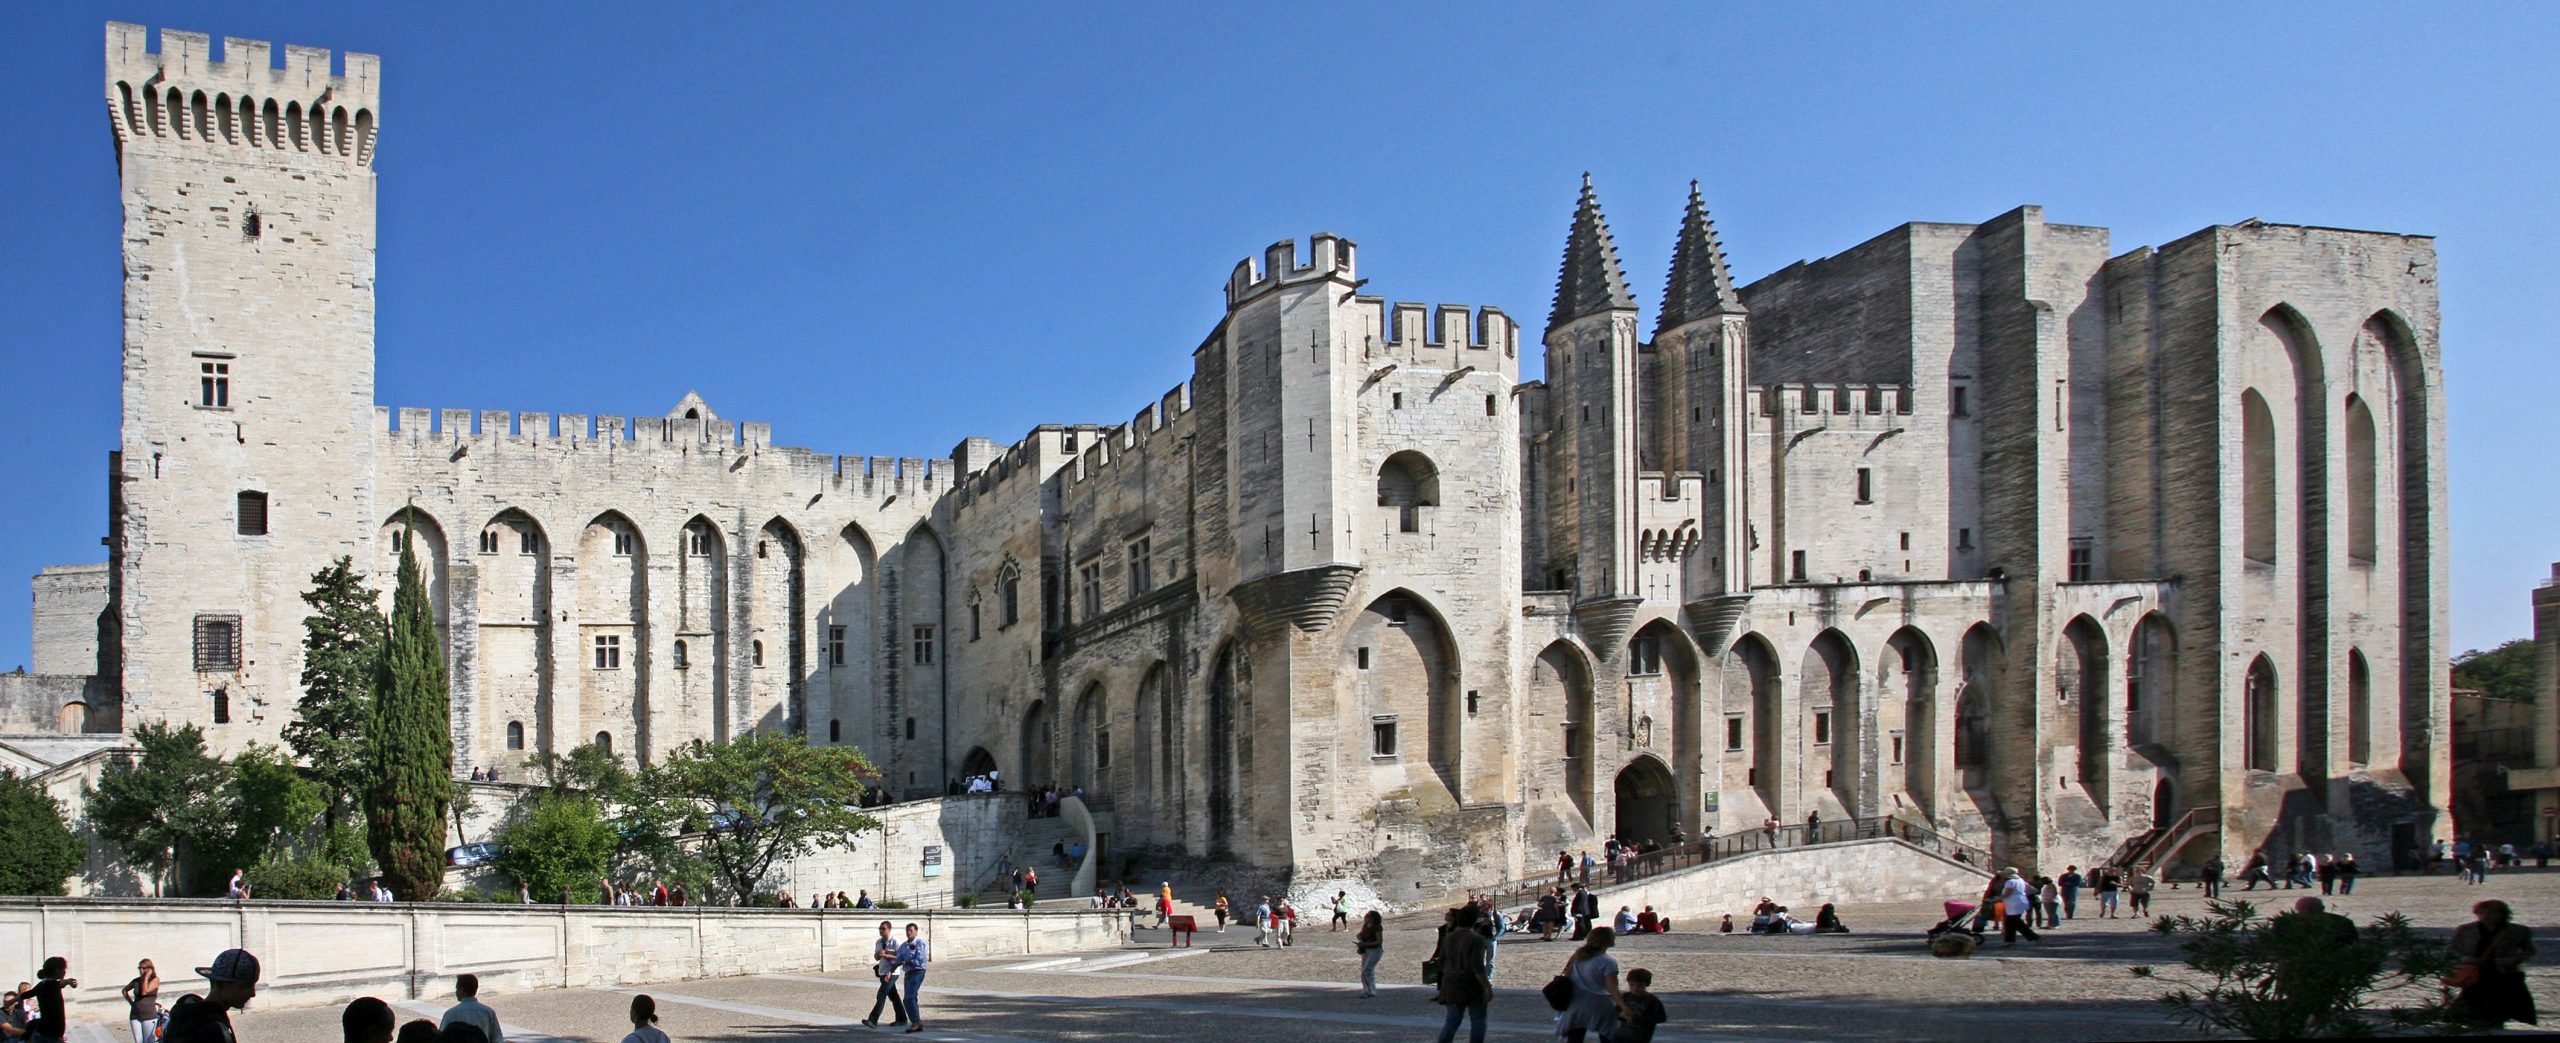 the Papal Palace in Avignon